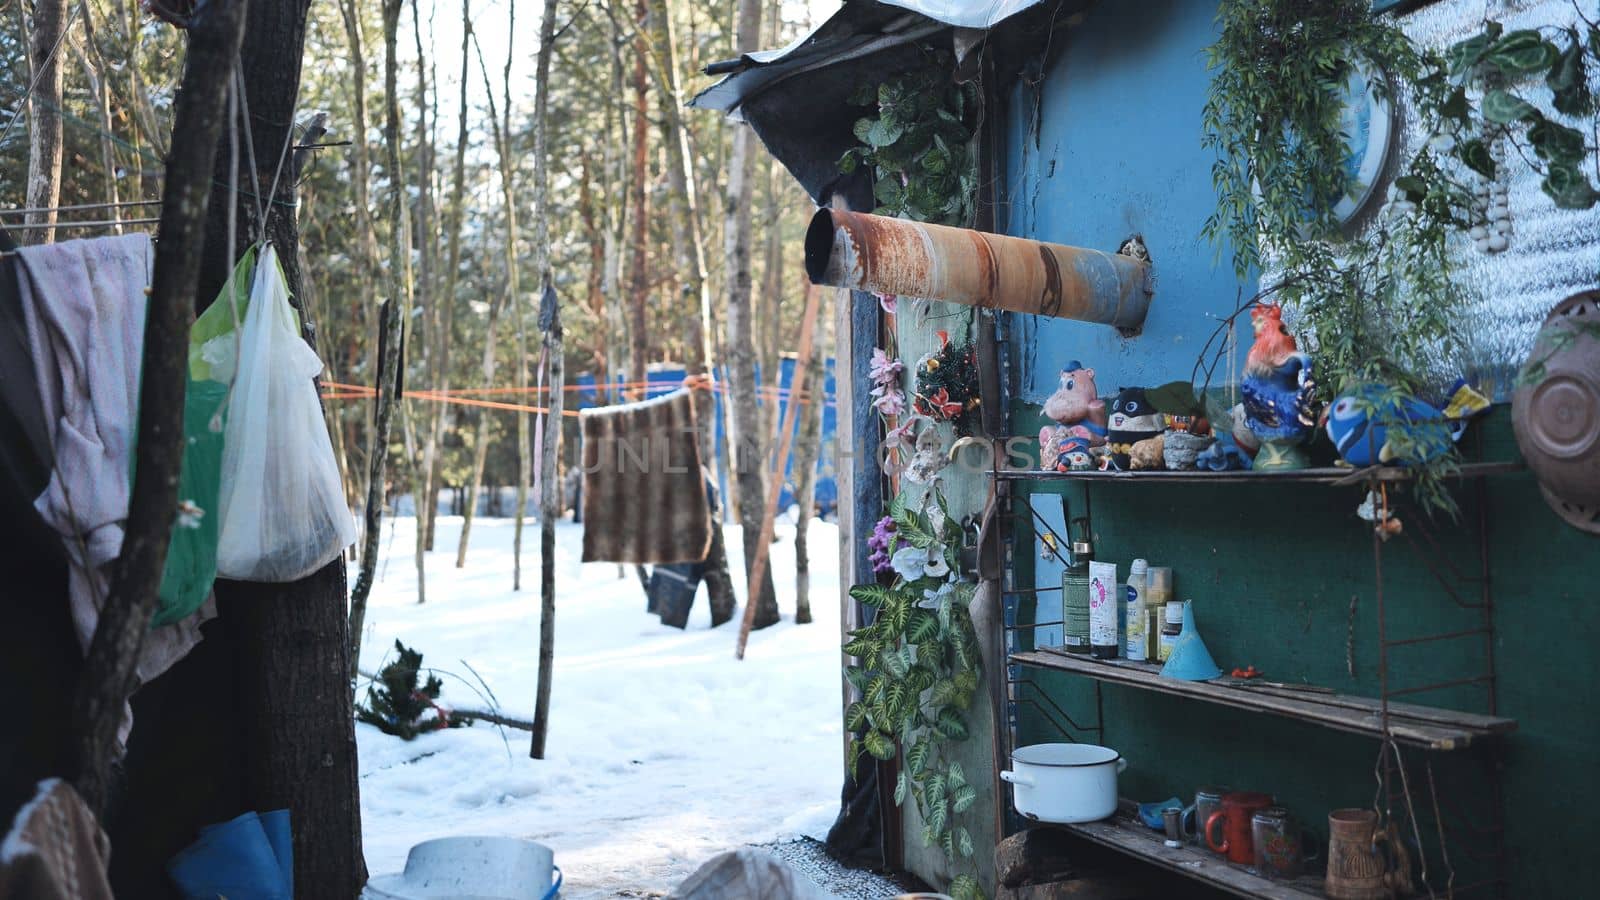 Homeless people go into their huts in the winter in the woods